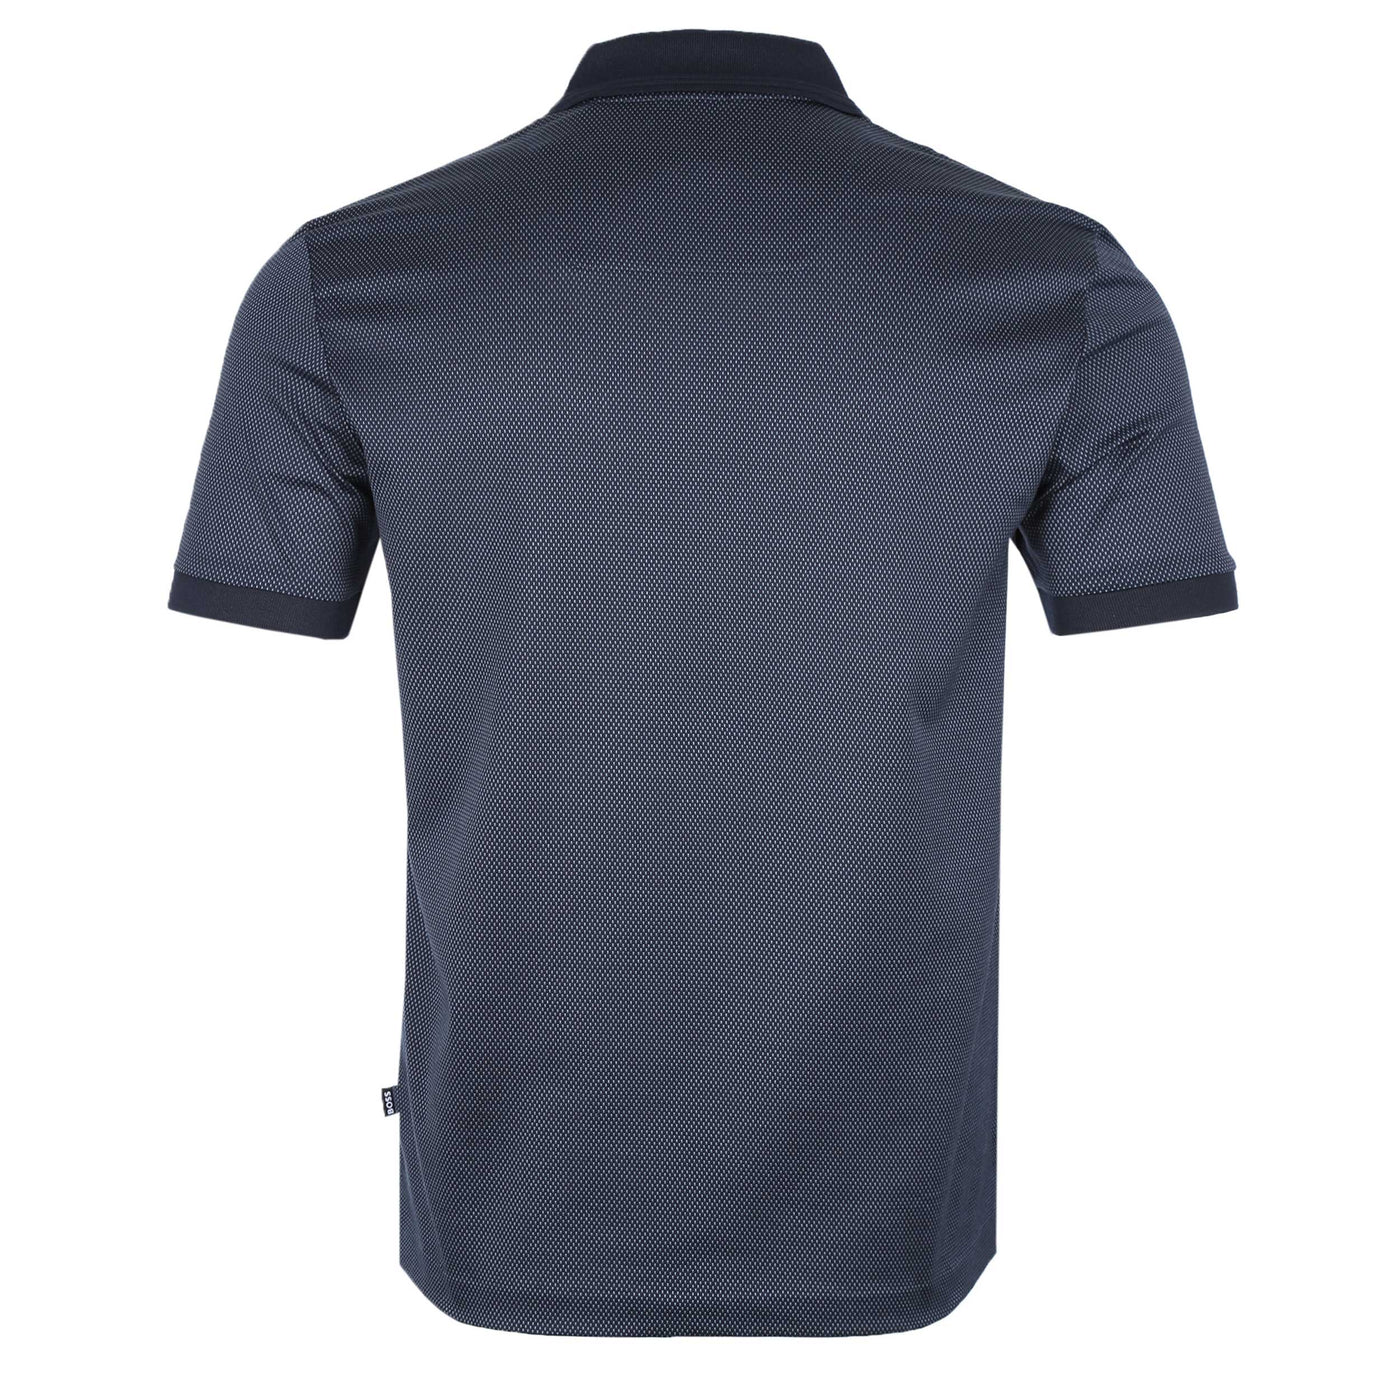 BOSS Phillipson 92 Polo Shirt in Navy